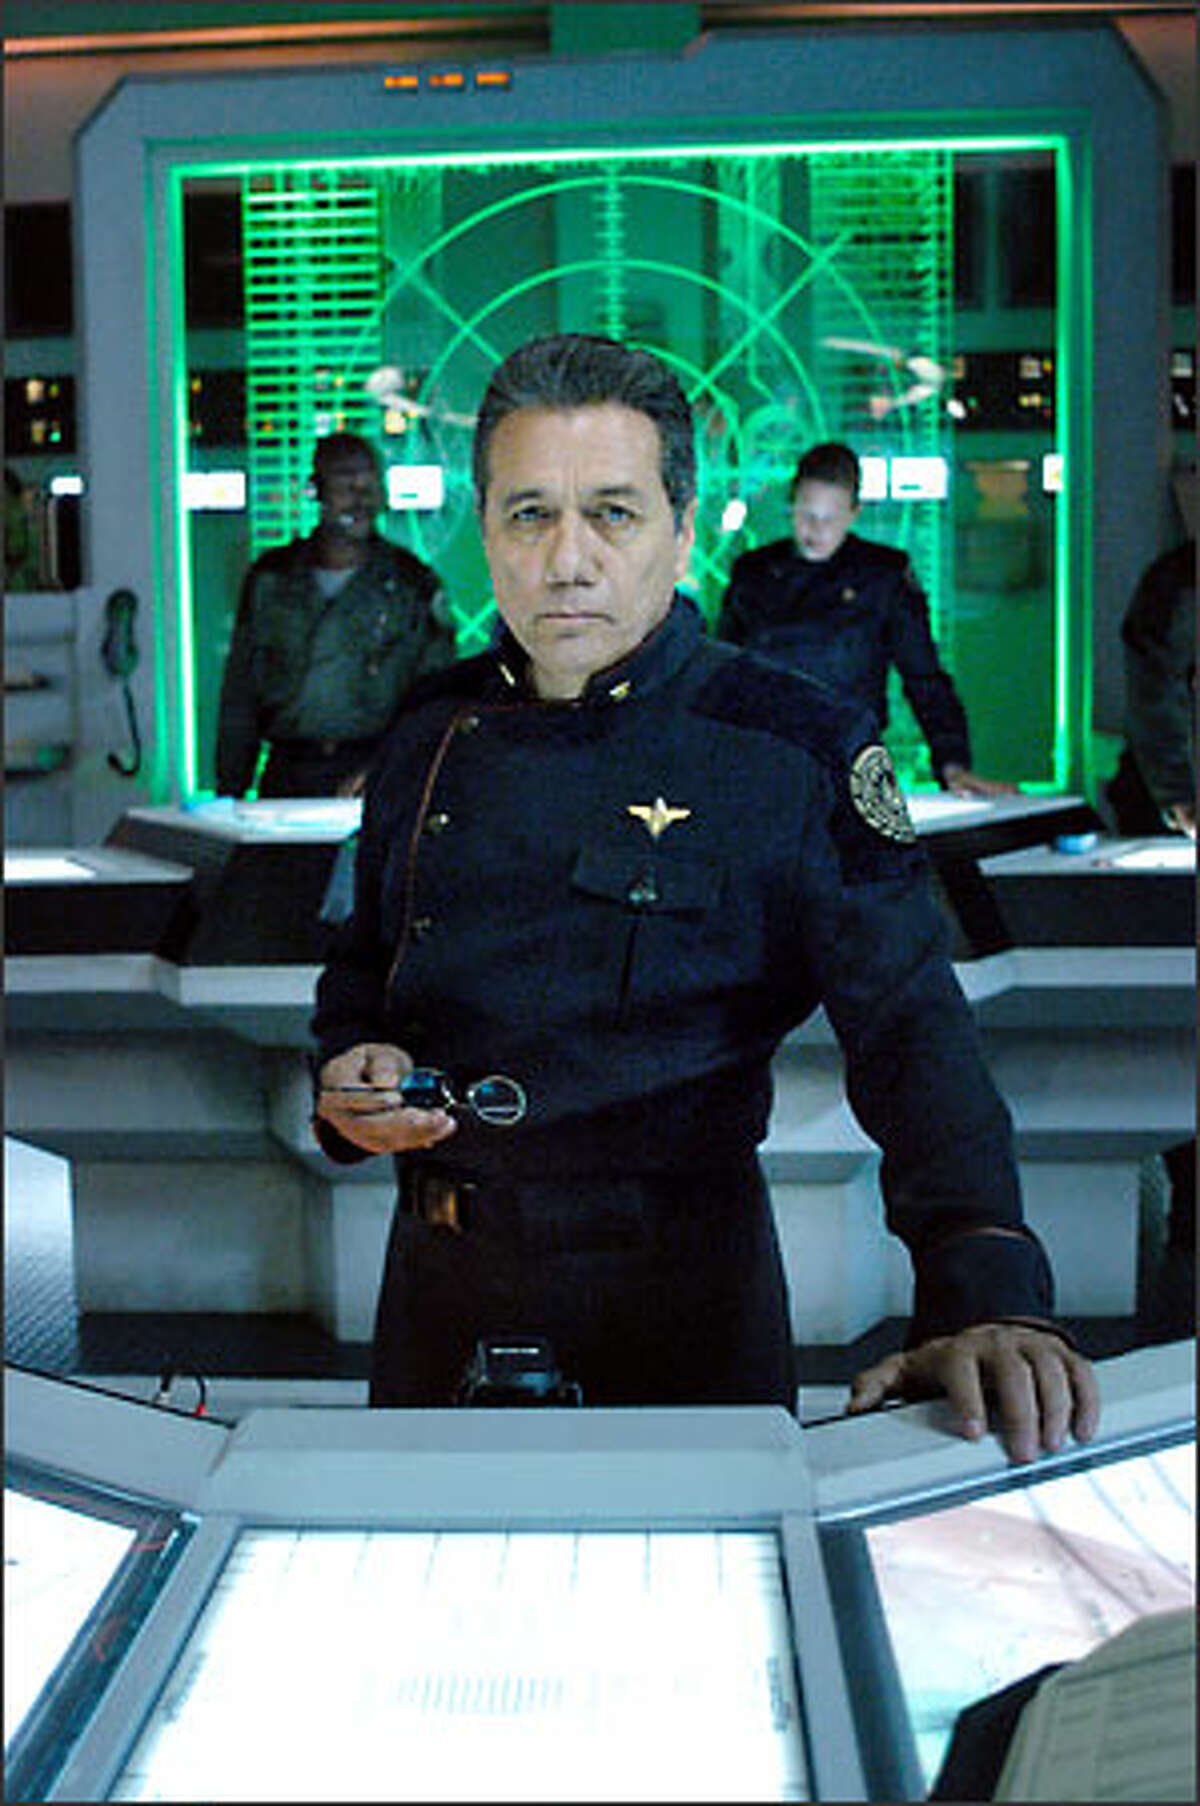 William Adama (Edward James Olmos), commander of Galactica, the last Colonial battlestar, leads the survivors of the Cylon attack on a quest for the legendary lost human colony called Earth. "Battlestar Galactica" airs on the Sci-Fi Channel Dec. 8-9, 2003.